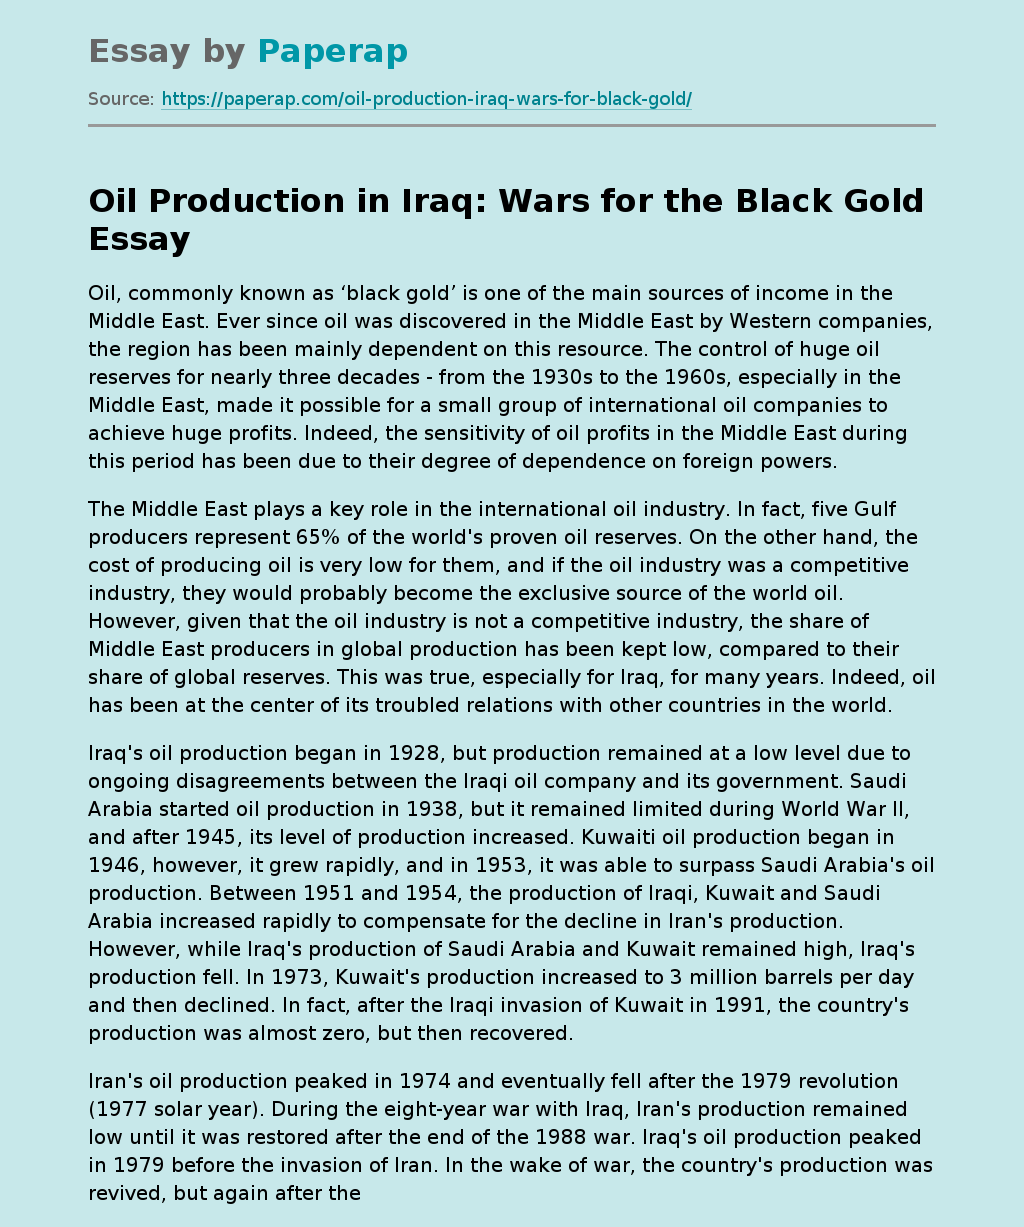 Oil Production in Iraq: Wars for the Black Gold